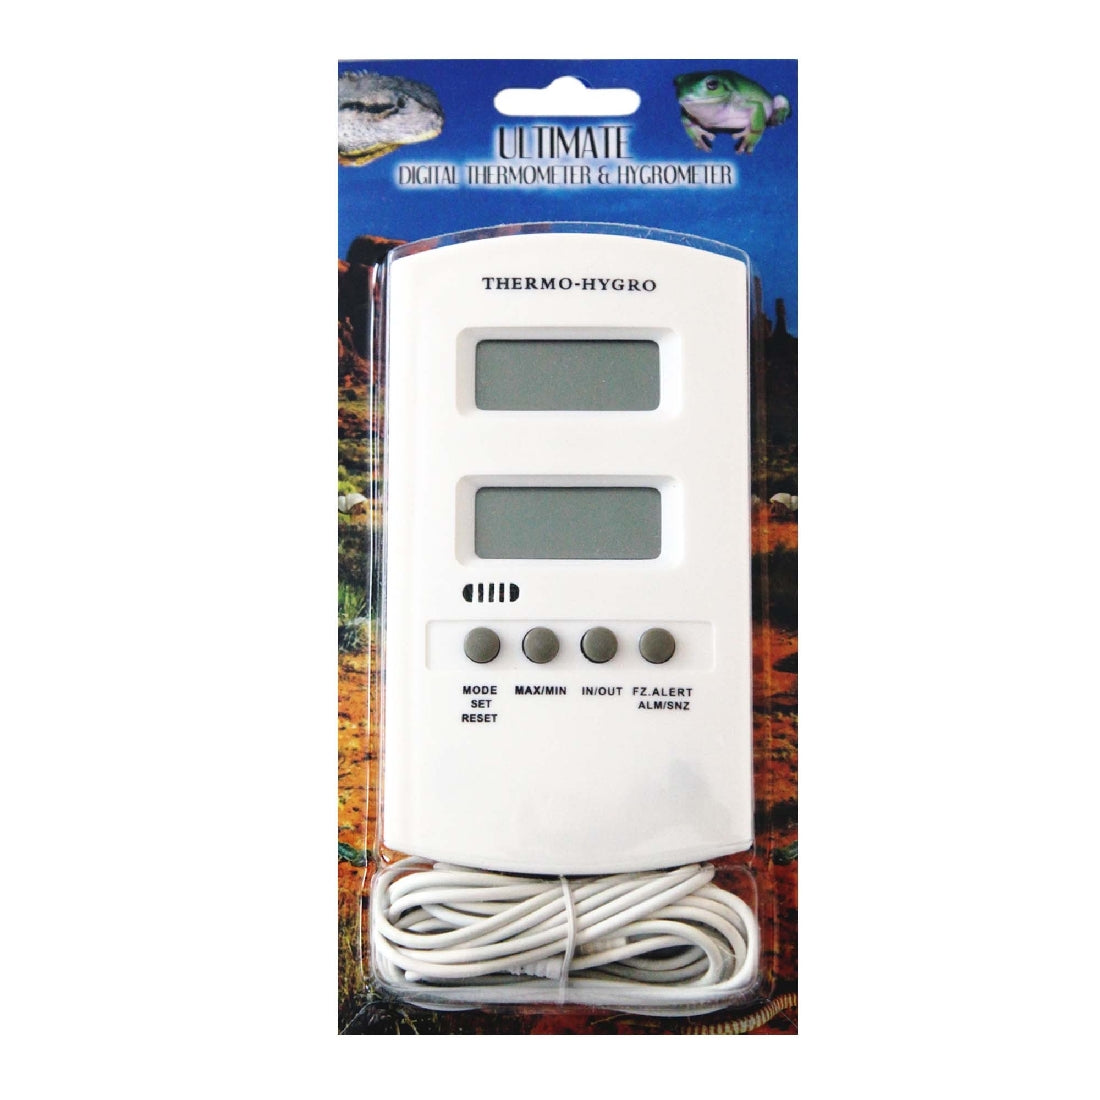 Digital Humidity/thermometer